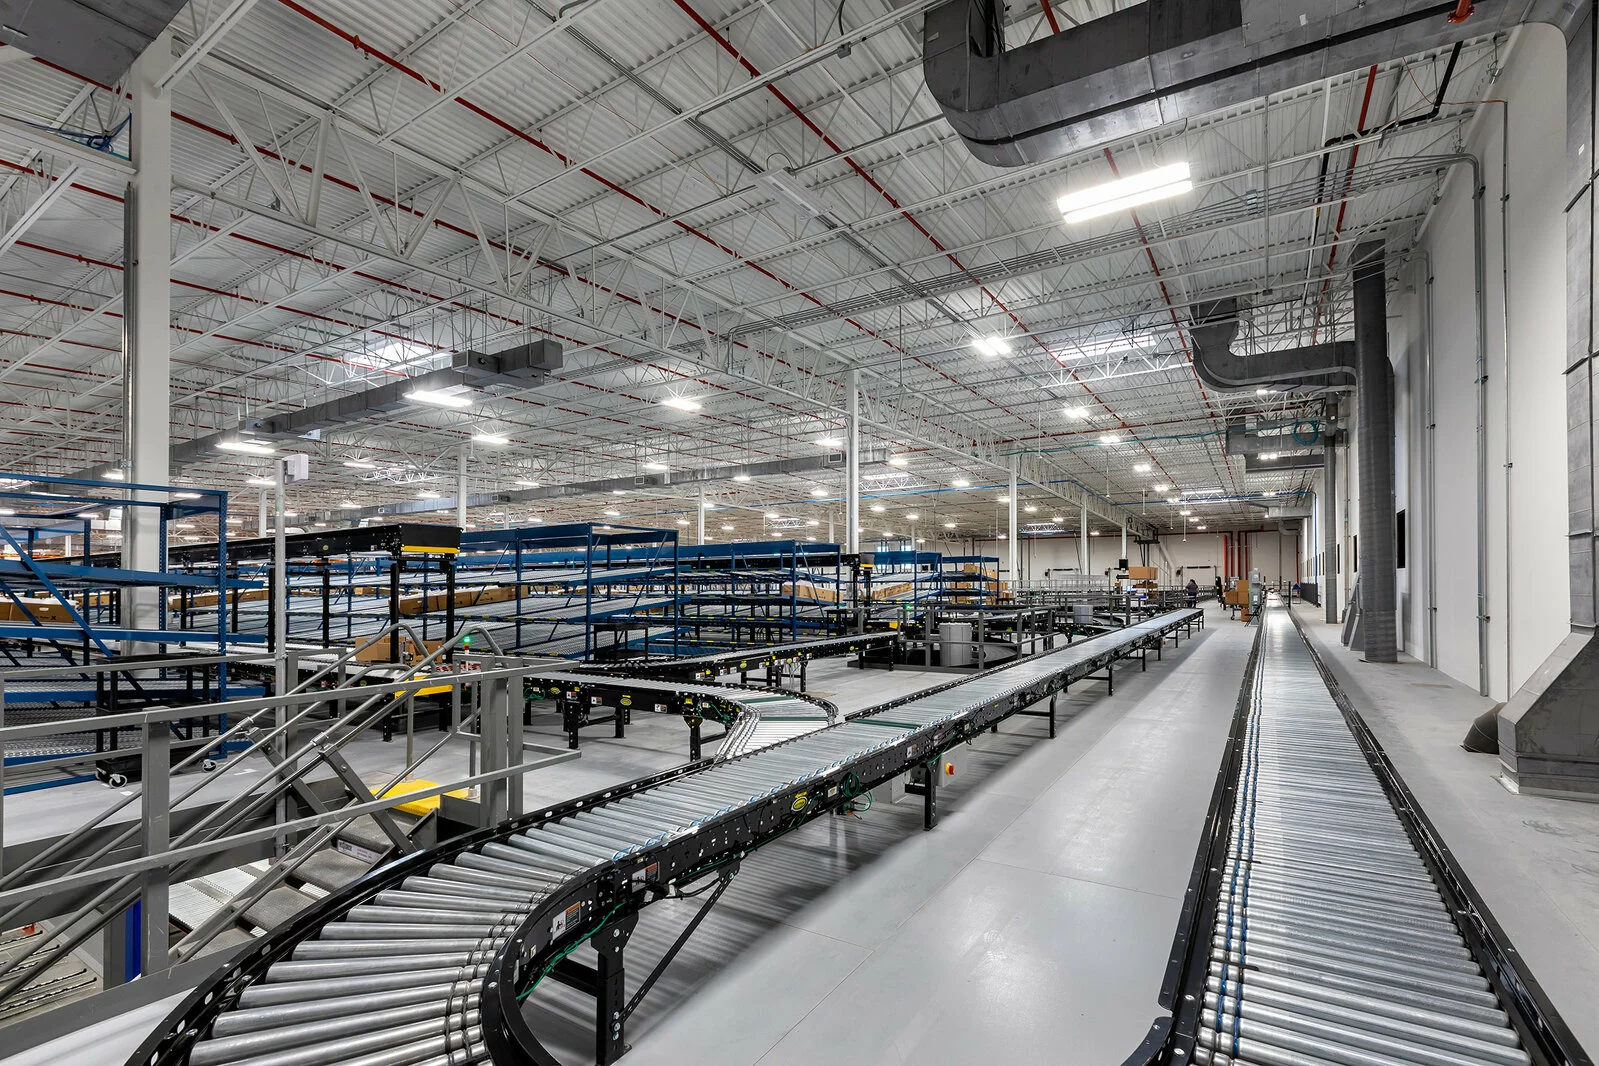 Interior Warehouse/ Distribution center with conveyor belts, vast interior space, multiple rose of shelving.